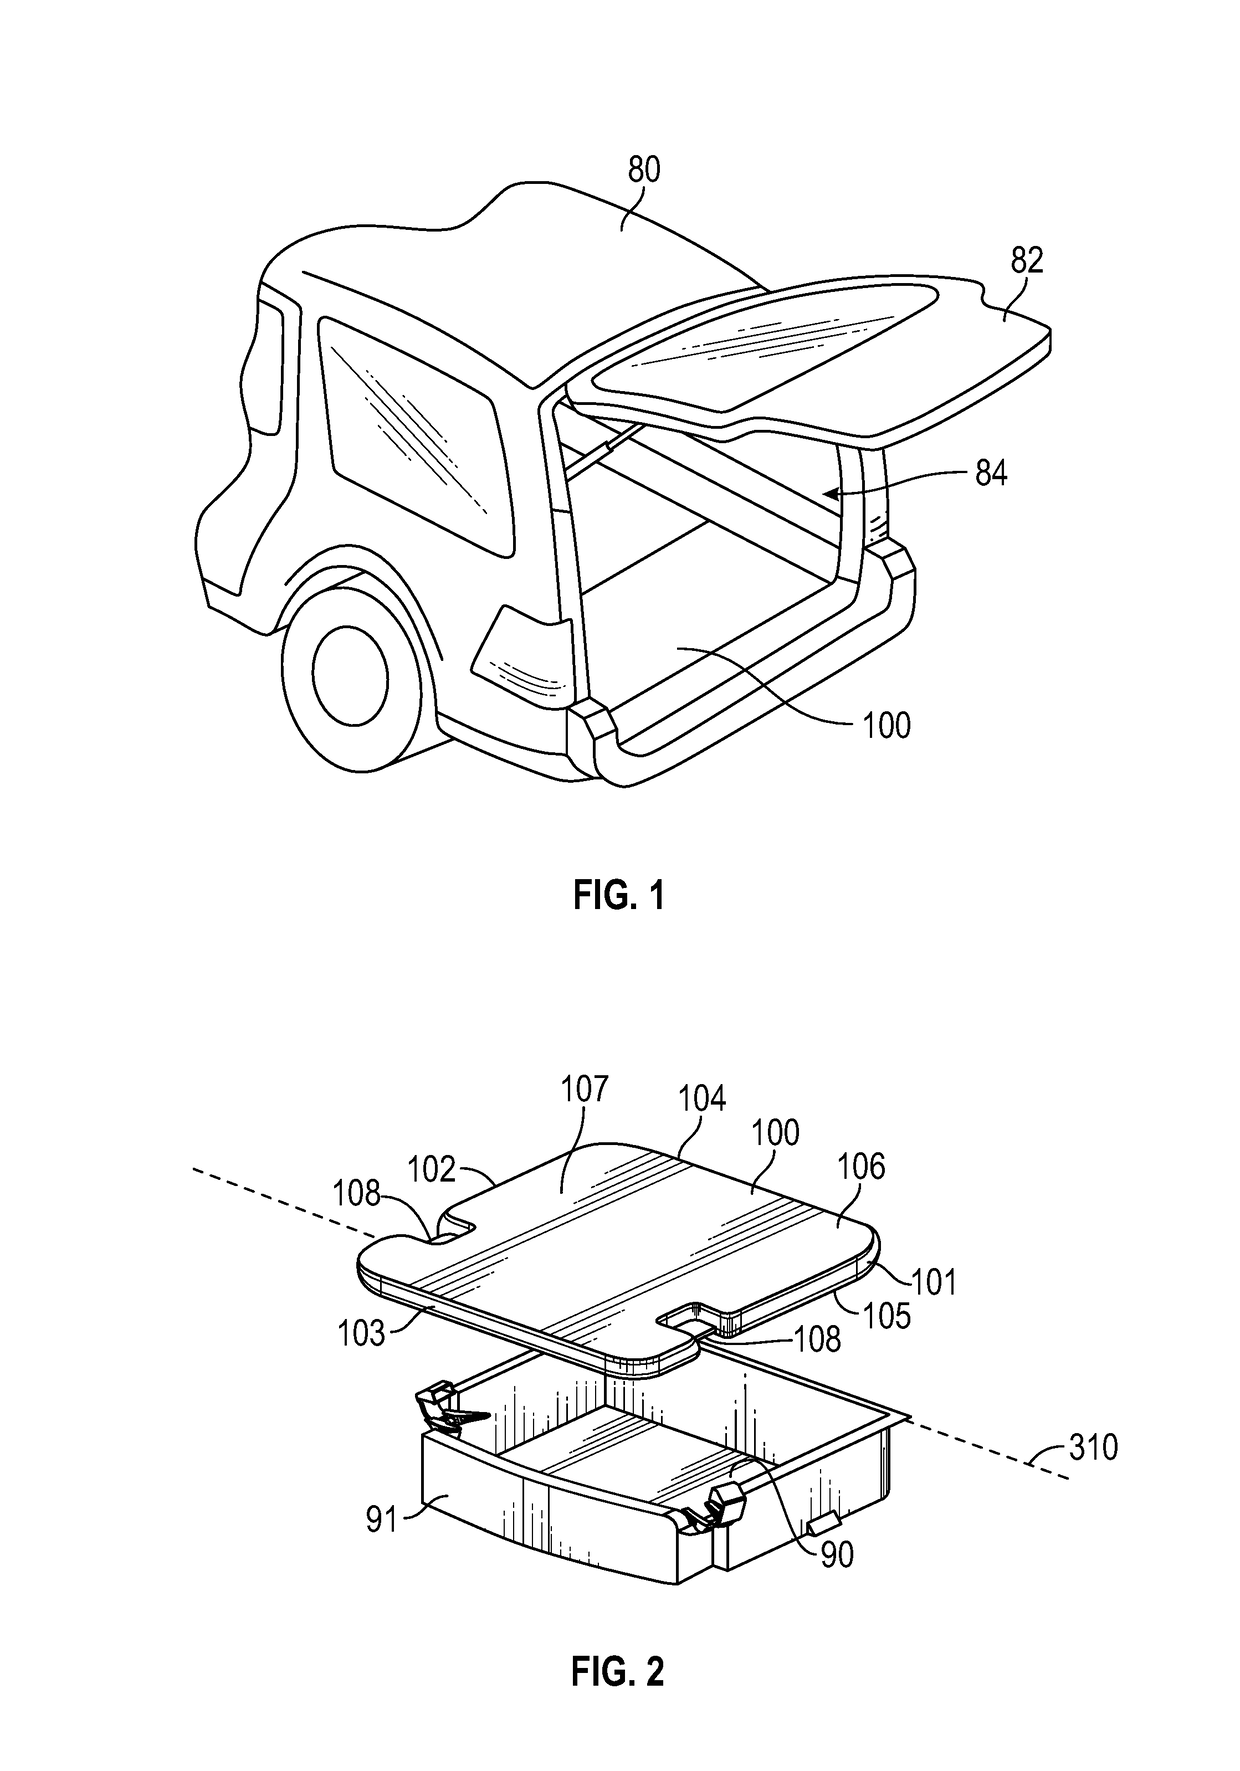 Load floor latches and latch assemblies, and vehicles having the same